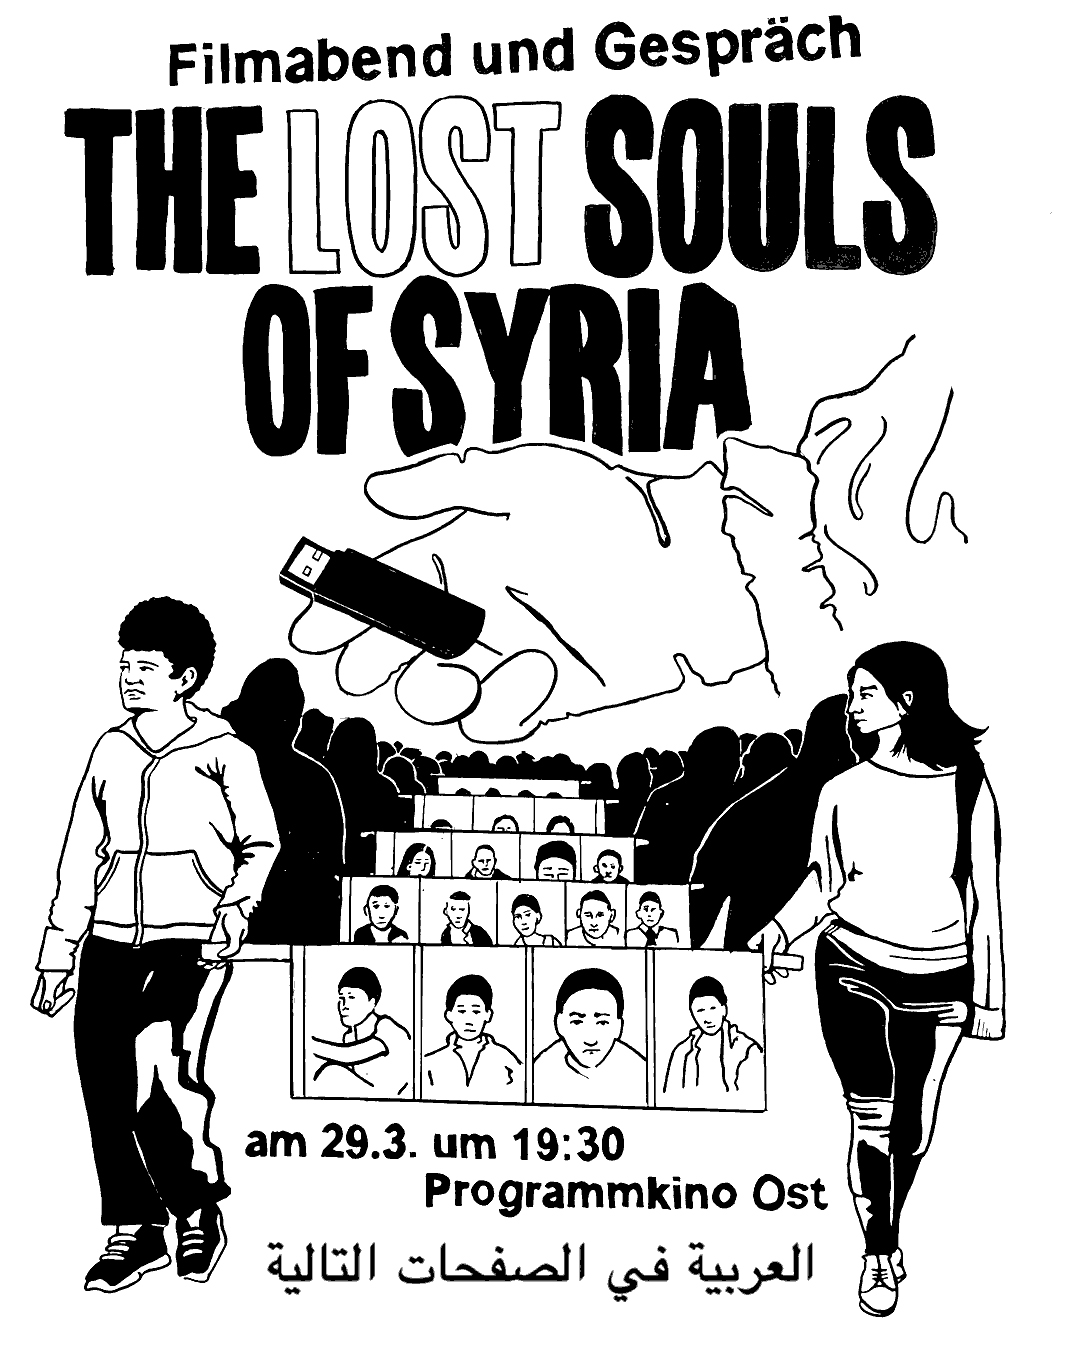 THE LOST SOULS OF SYRIA